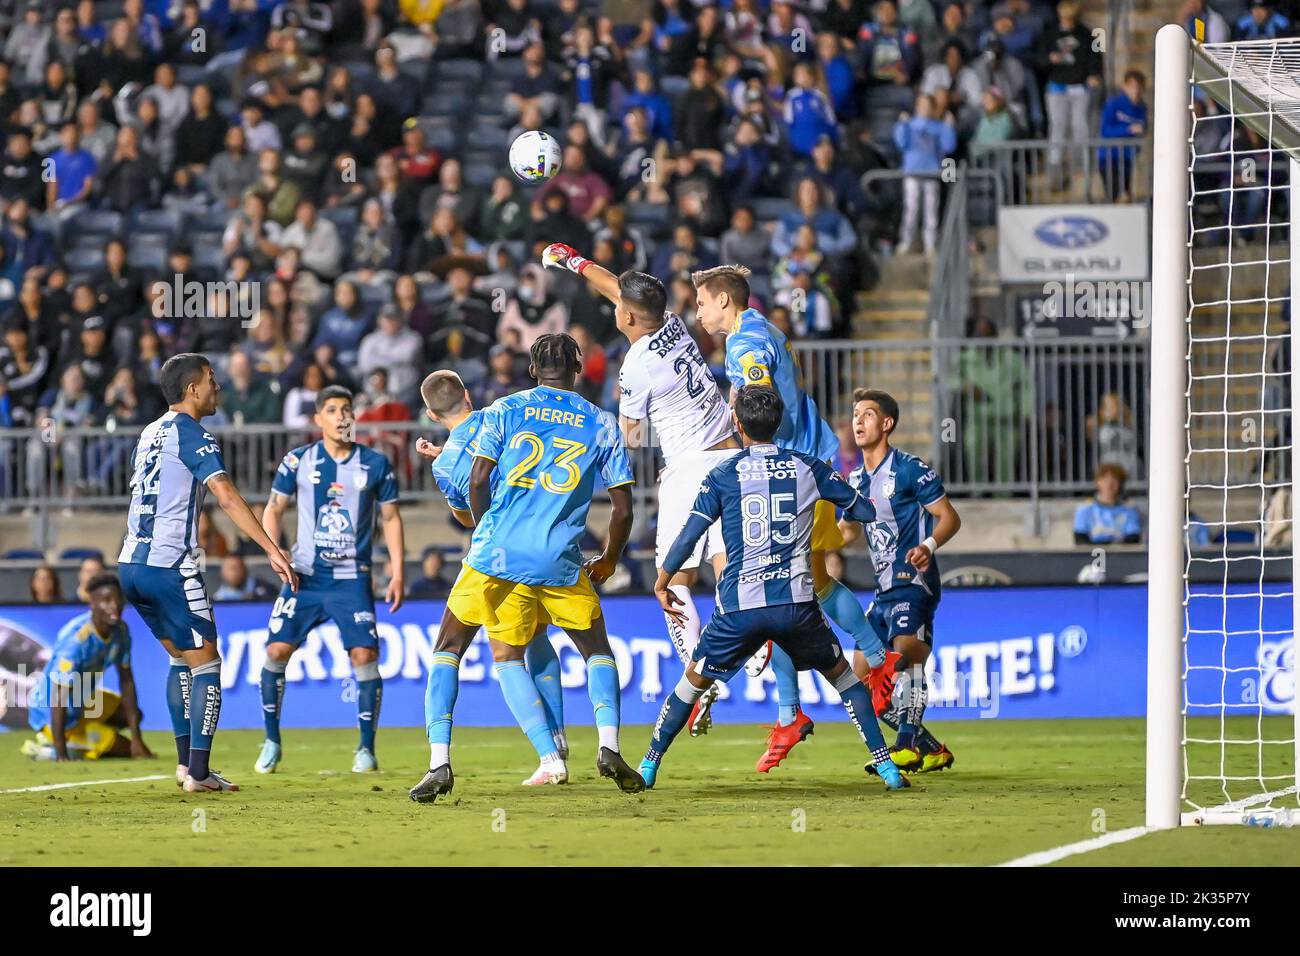 Chester, PA USA. 24th Sep - Pachuca goalie Carlos Moreno punches the ball away. Photo by Don Mennig - Alamy Live News Stock Photo